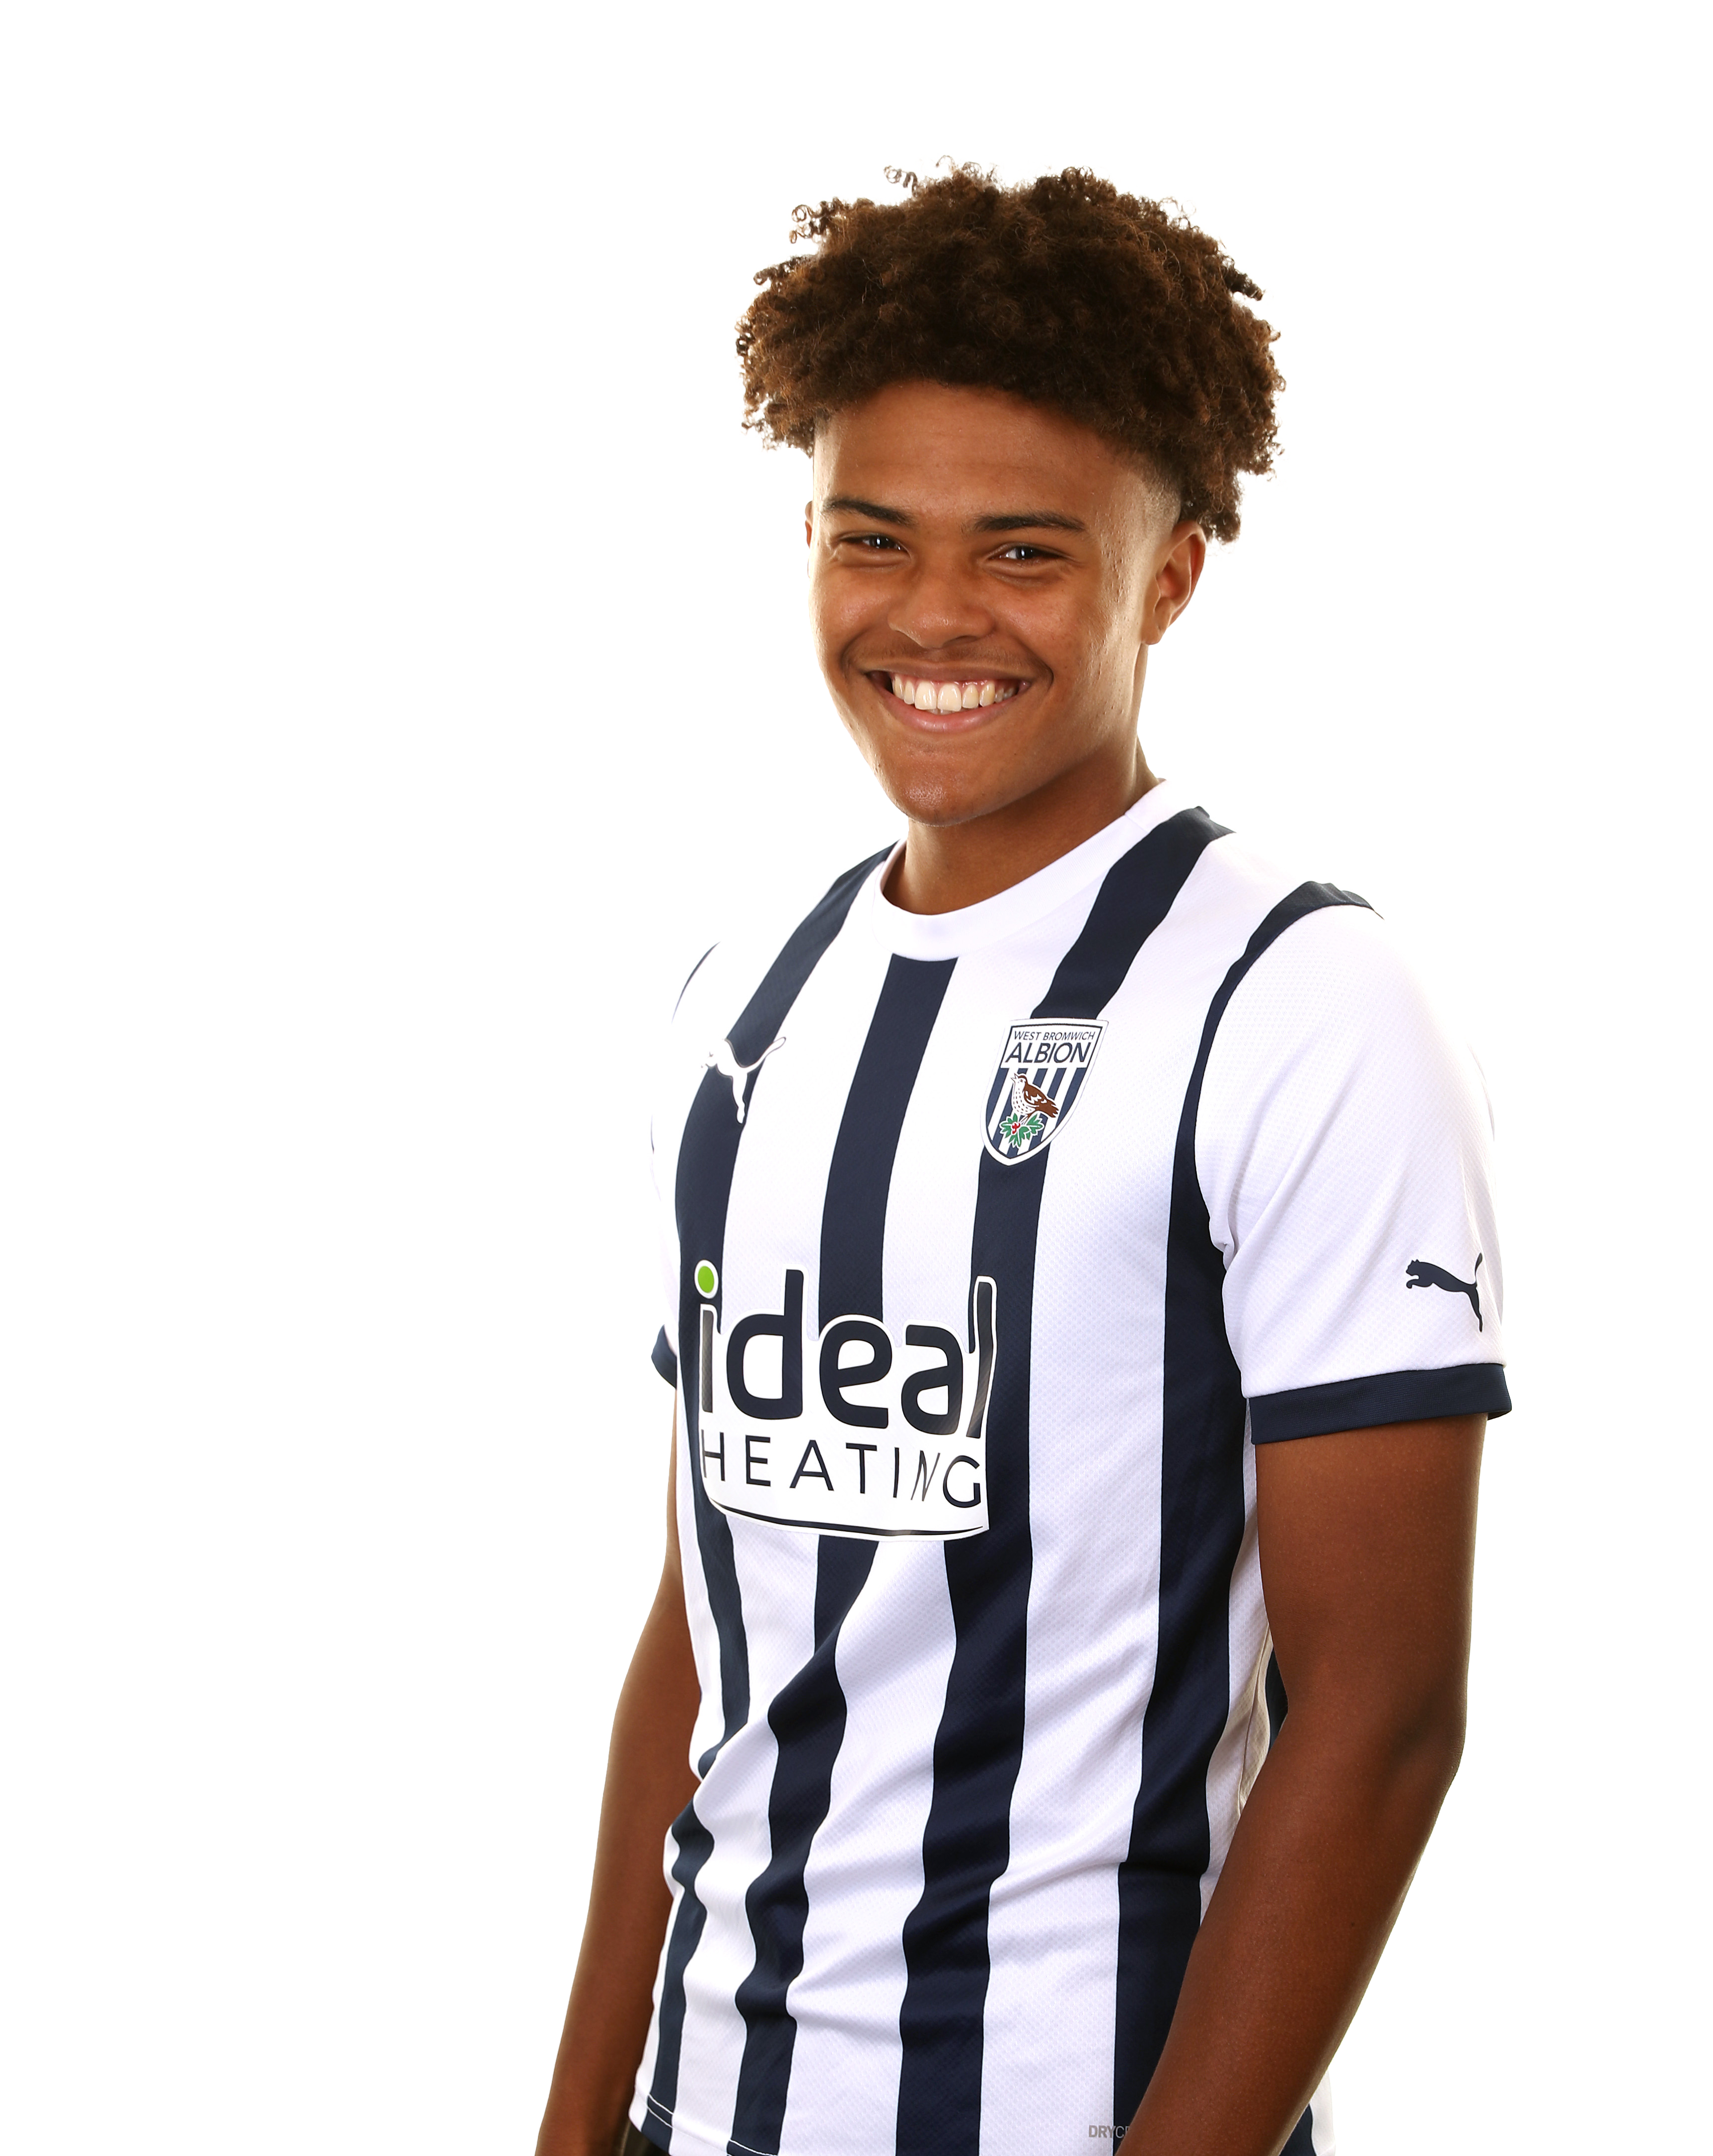 A photo headshot of Albion Under-18s player Corey Sears ahead of the 2023/24 season